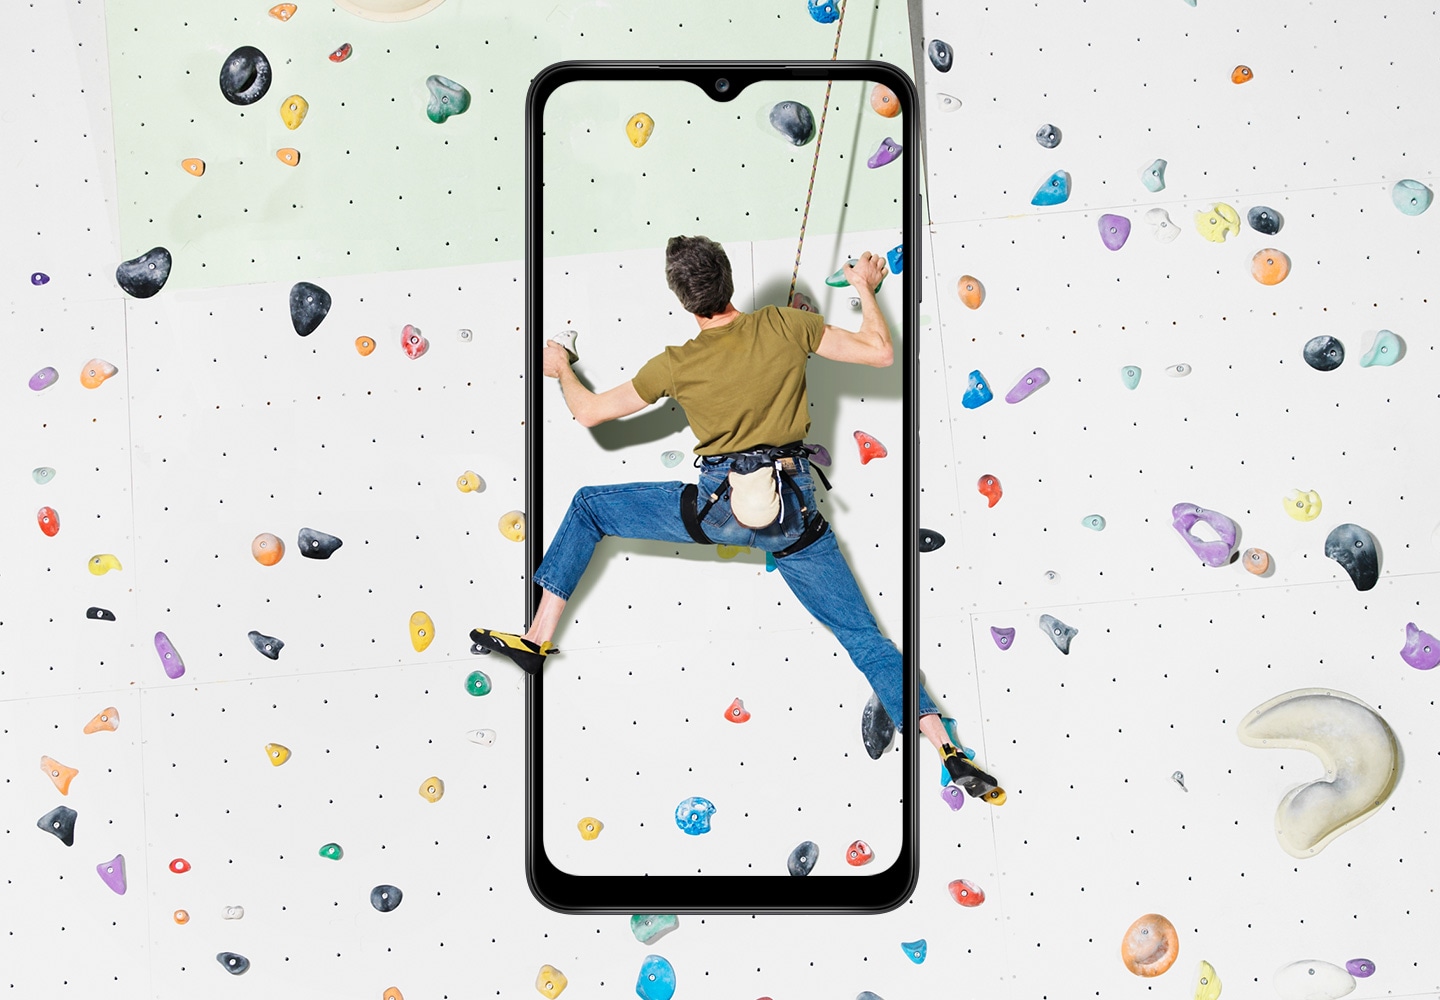 A guy climbing in motion captured in Galaxy A12 display, utilizing 6.5 inch Infinity-V display feature.